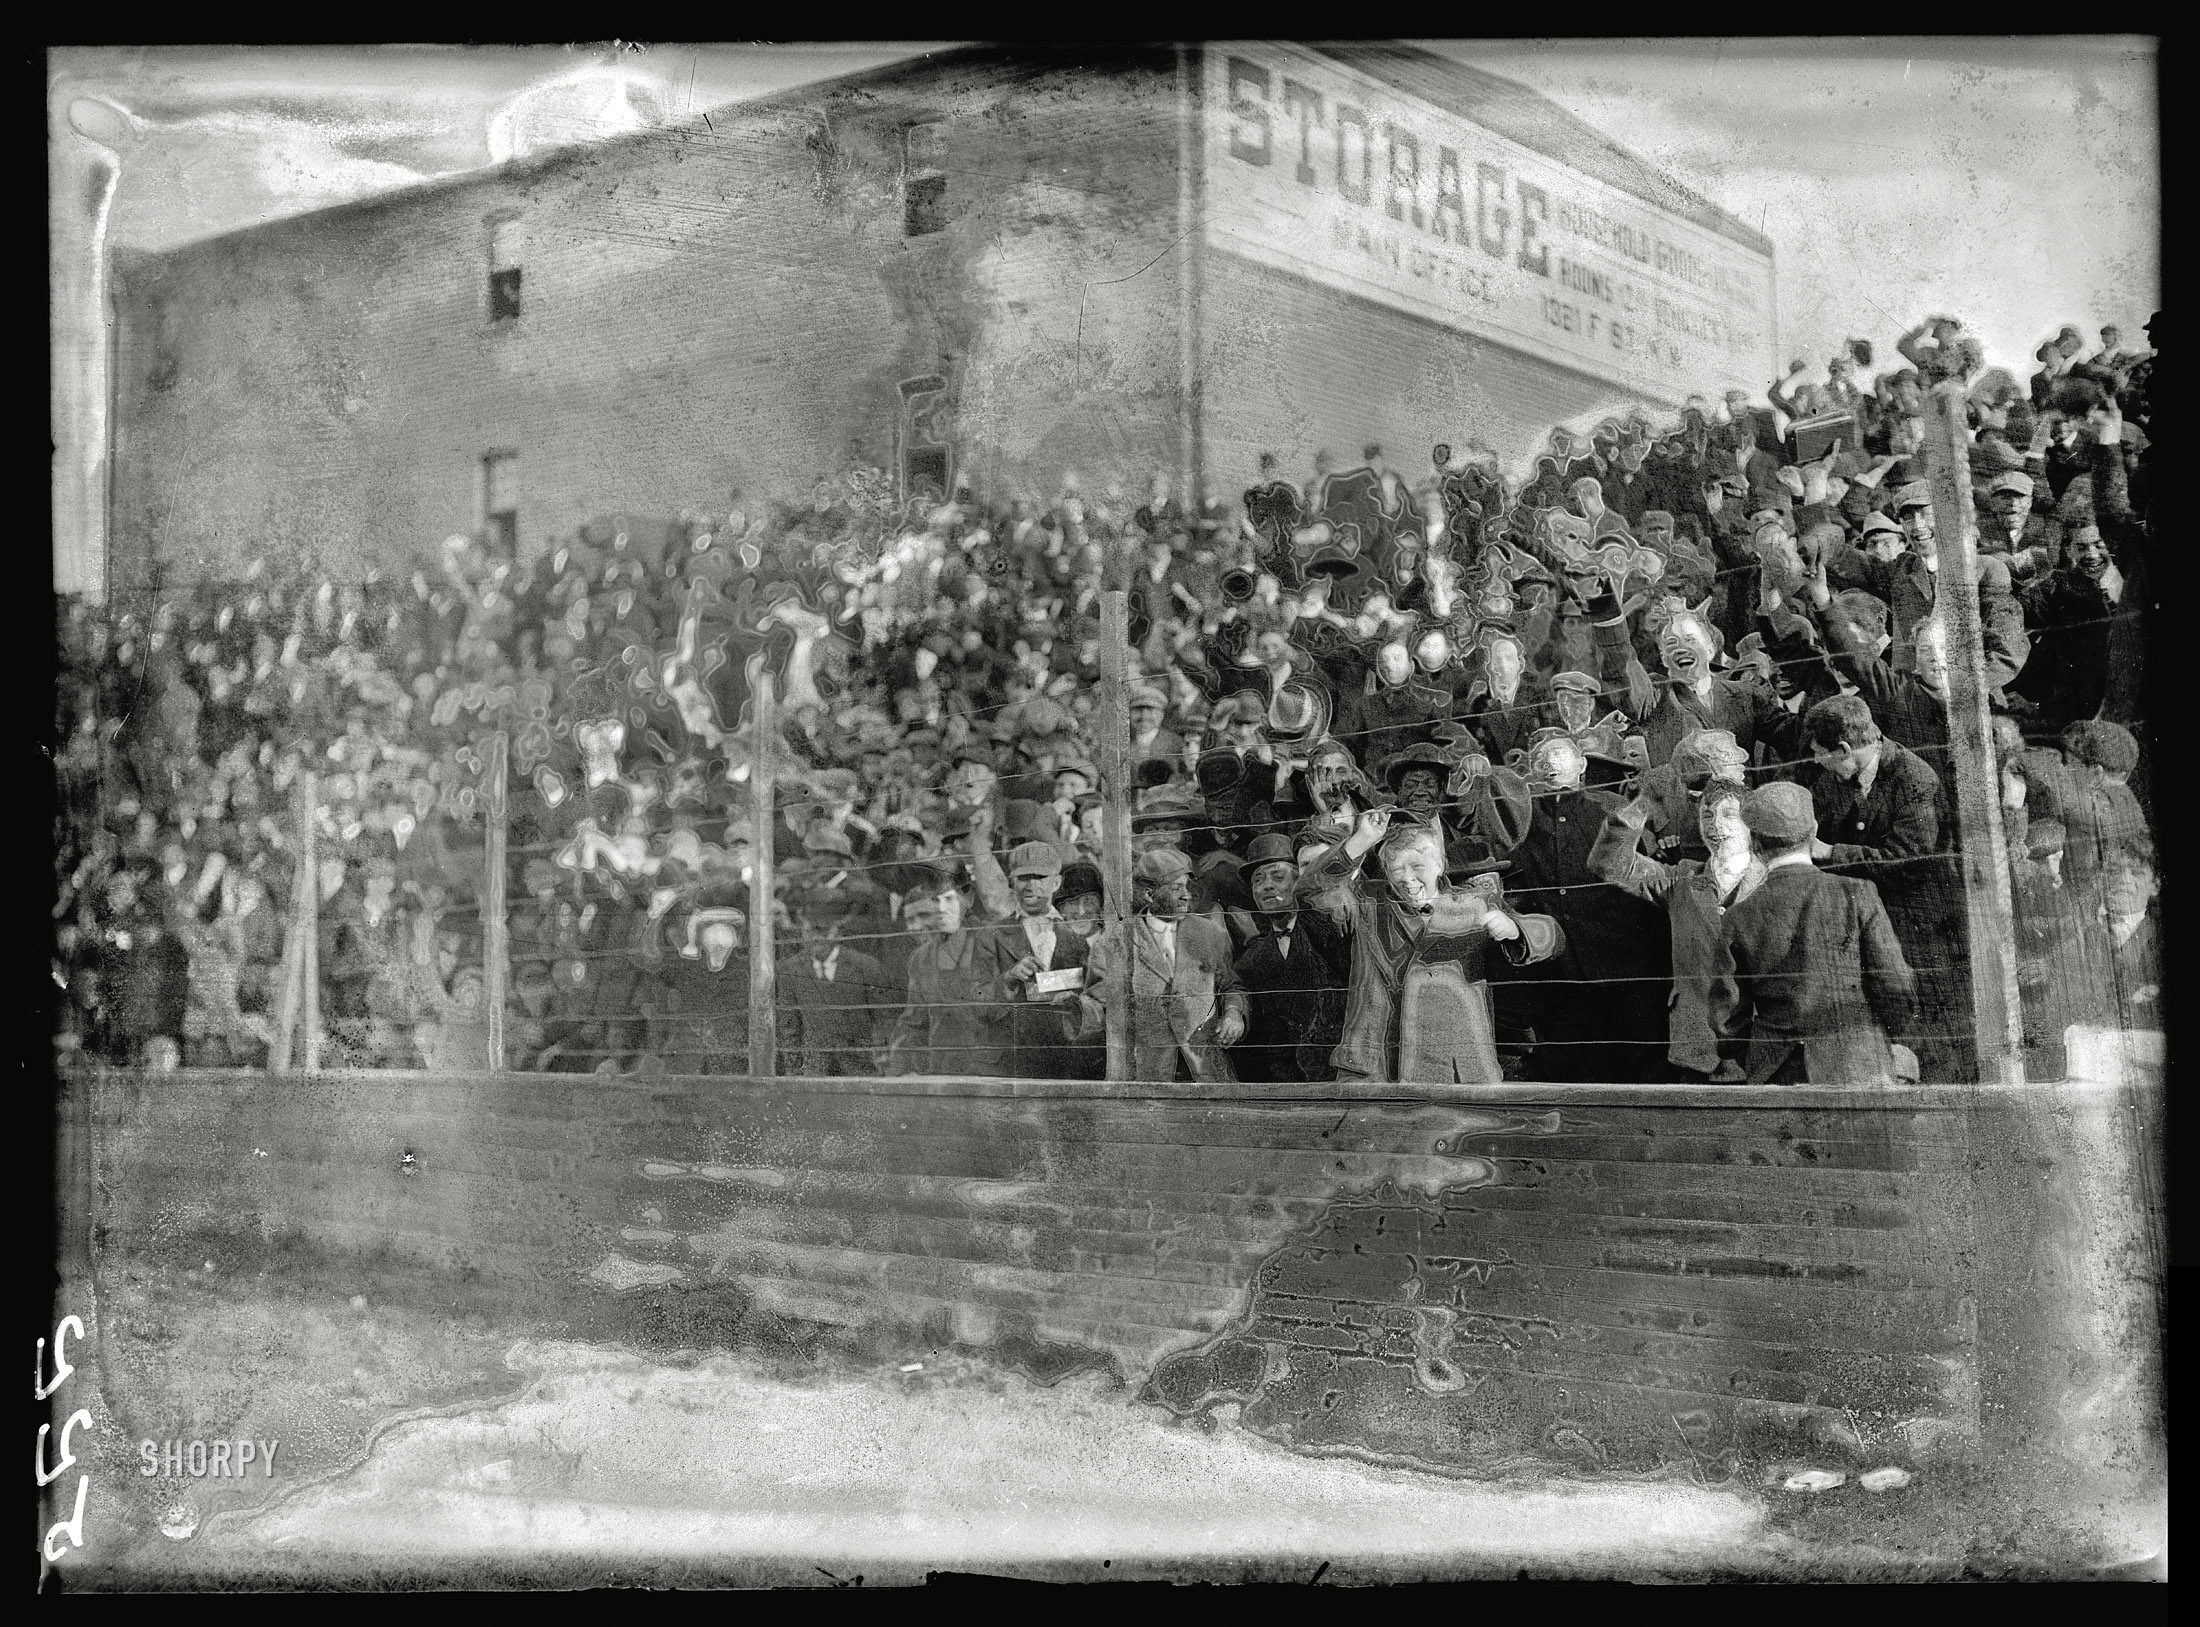 1911. Washington, D.C. "Professional baseball -- view during game." The unintentional artistic influences here range from Peter Max to Edvard Munch, thanks to mold on the emulsion. Harris & Ewing glass negative. View full size.